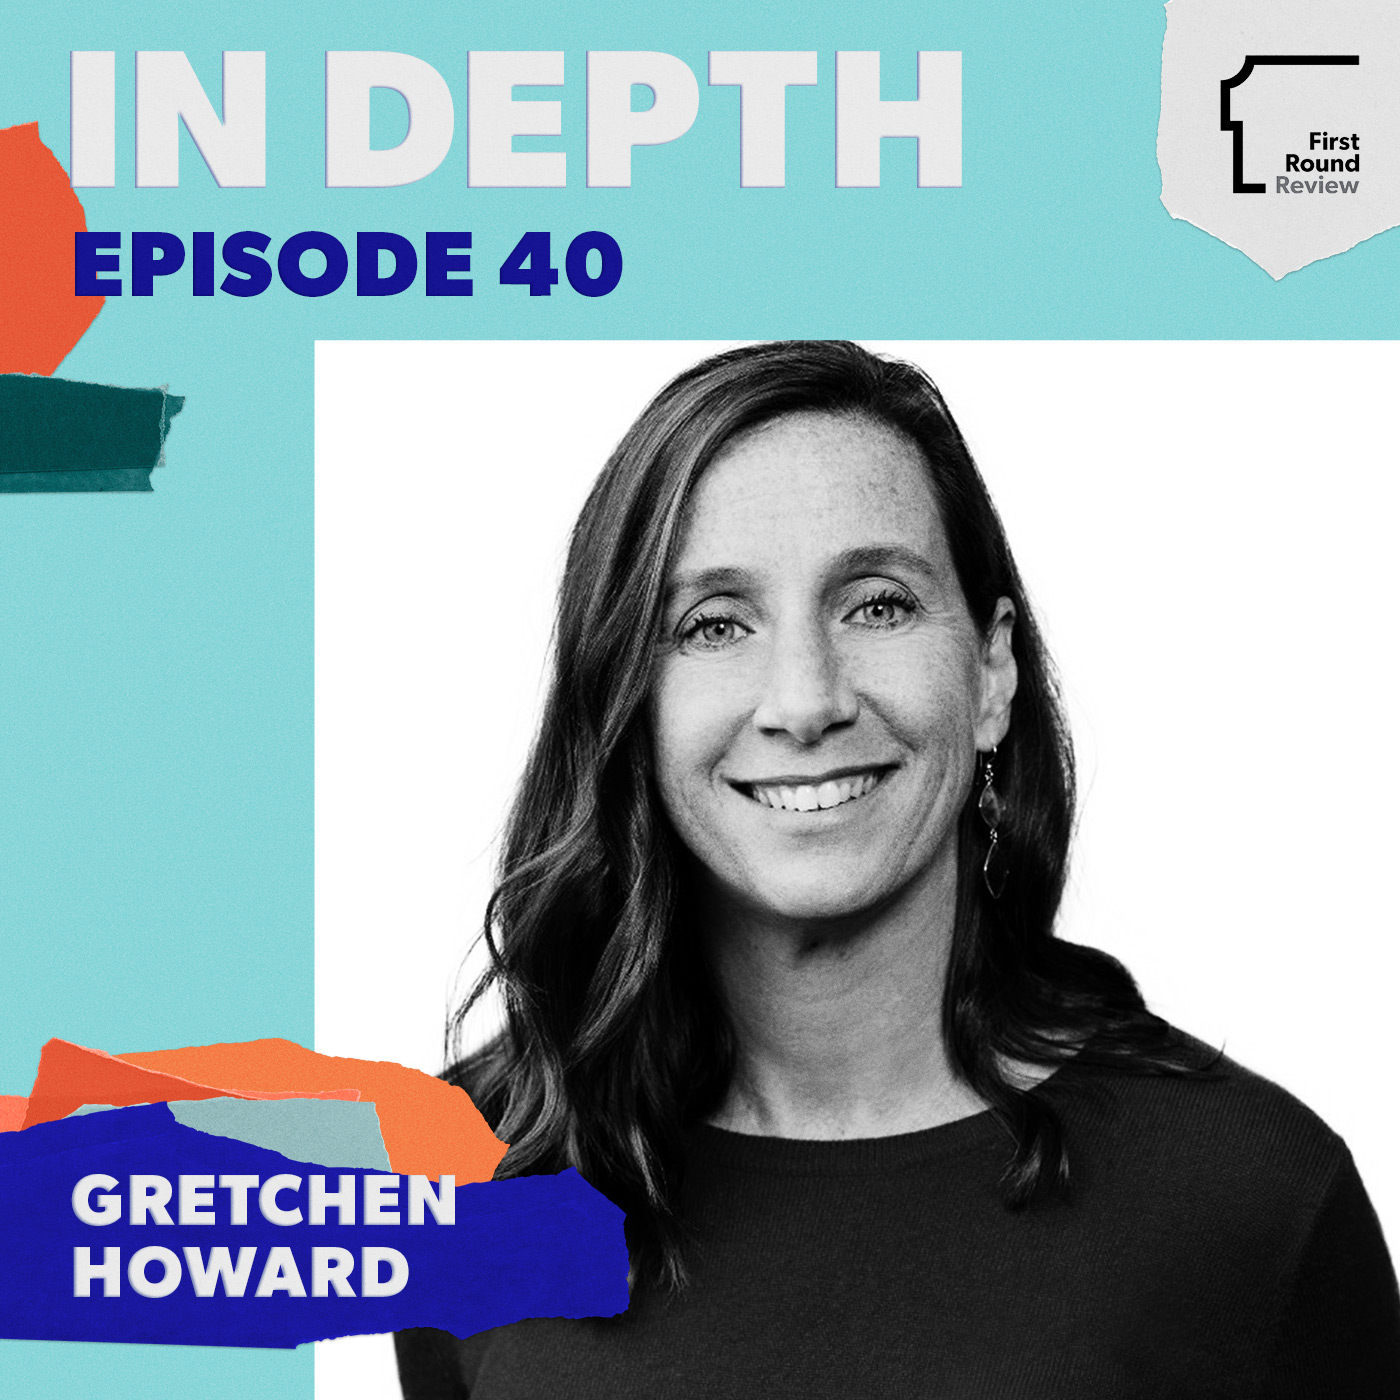 Executive hiring is incredibly difficult to get right — Robinhood COO Gretchen Howard shares her playbook